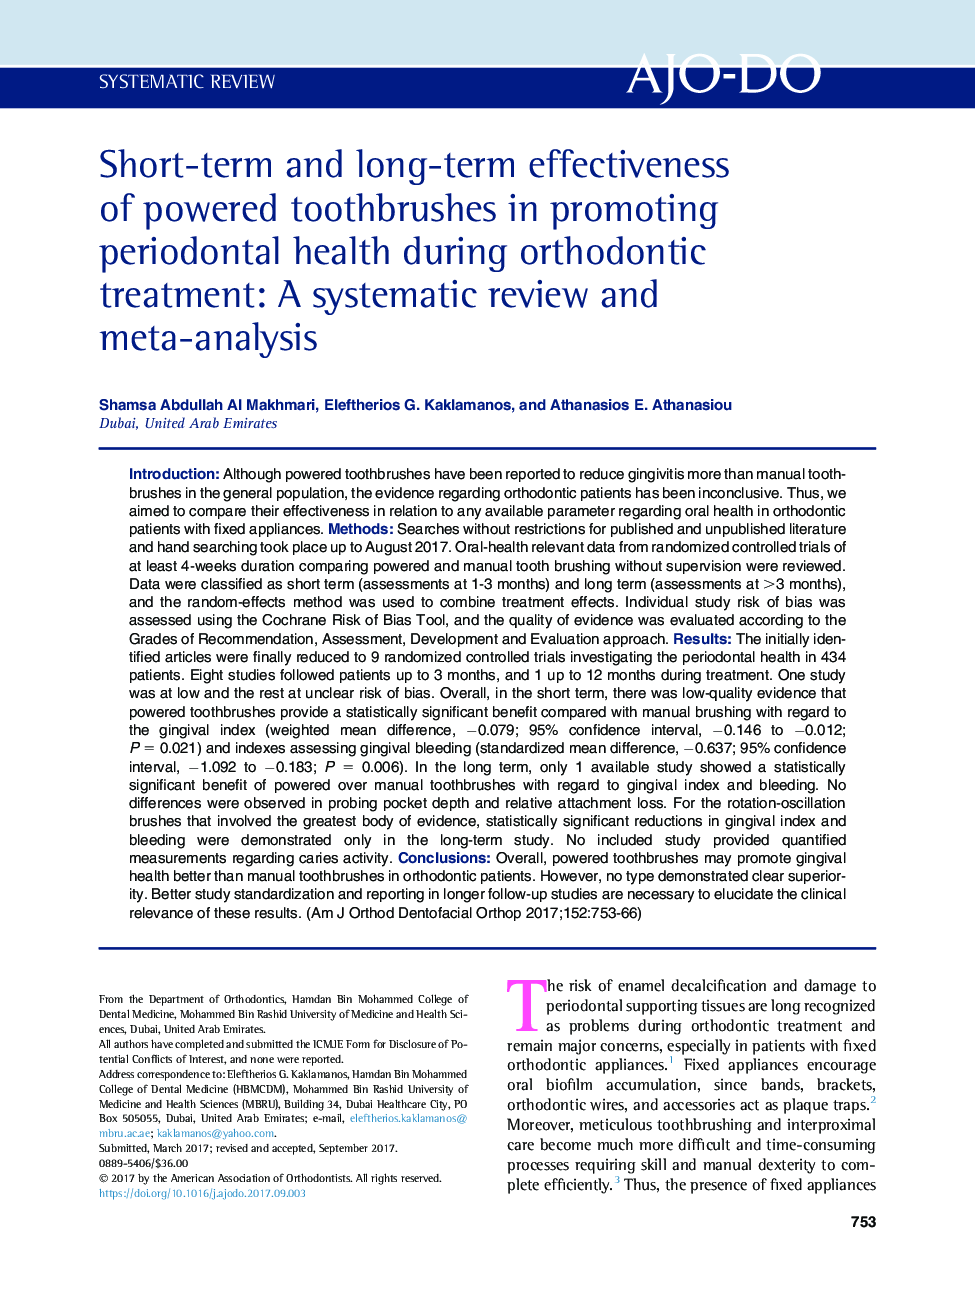 Short-term and long-term effectiveness of powered toothbrushes in promoting periodontal health during orthodontic treatment: A systematic review and meta-analysis